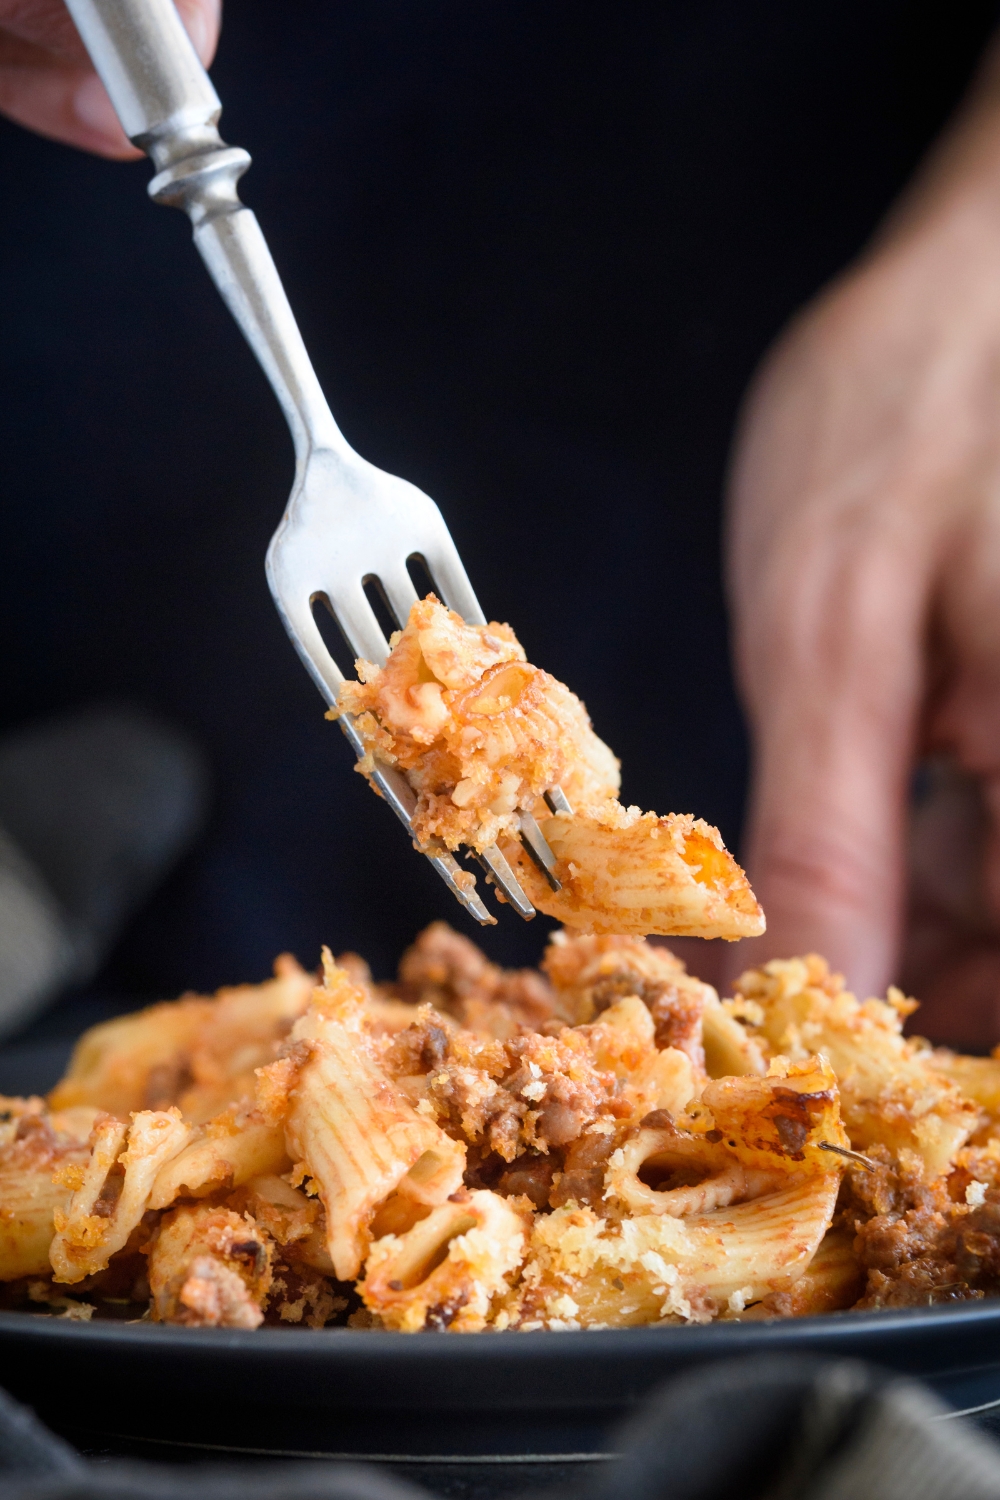 A fork holding pieces of pasta covered in sauce above a plate of Italian casserole.